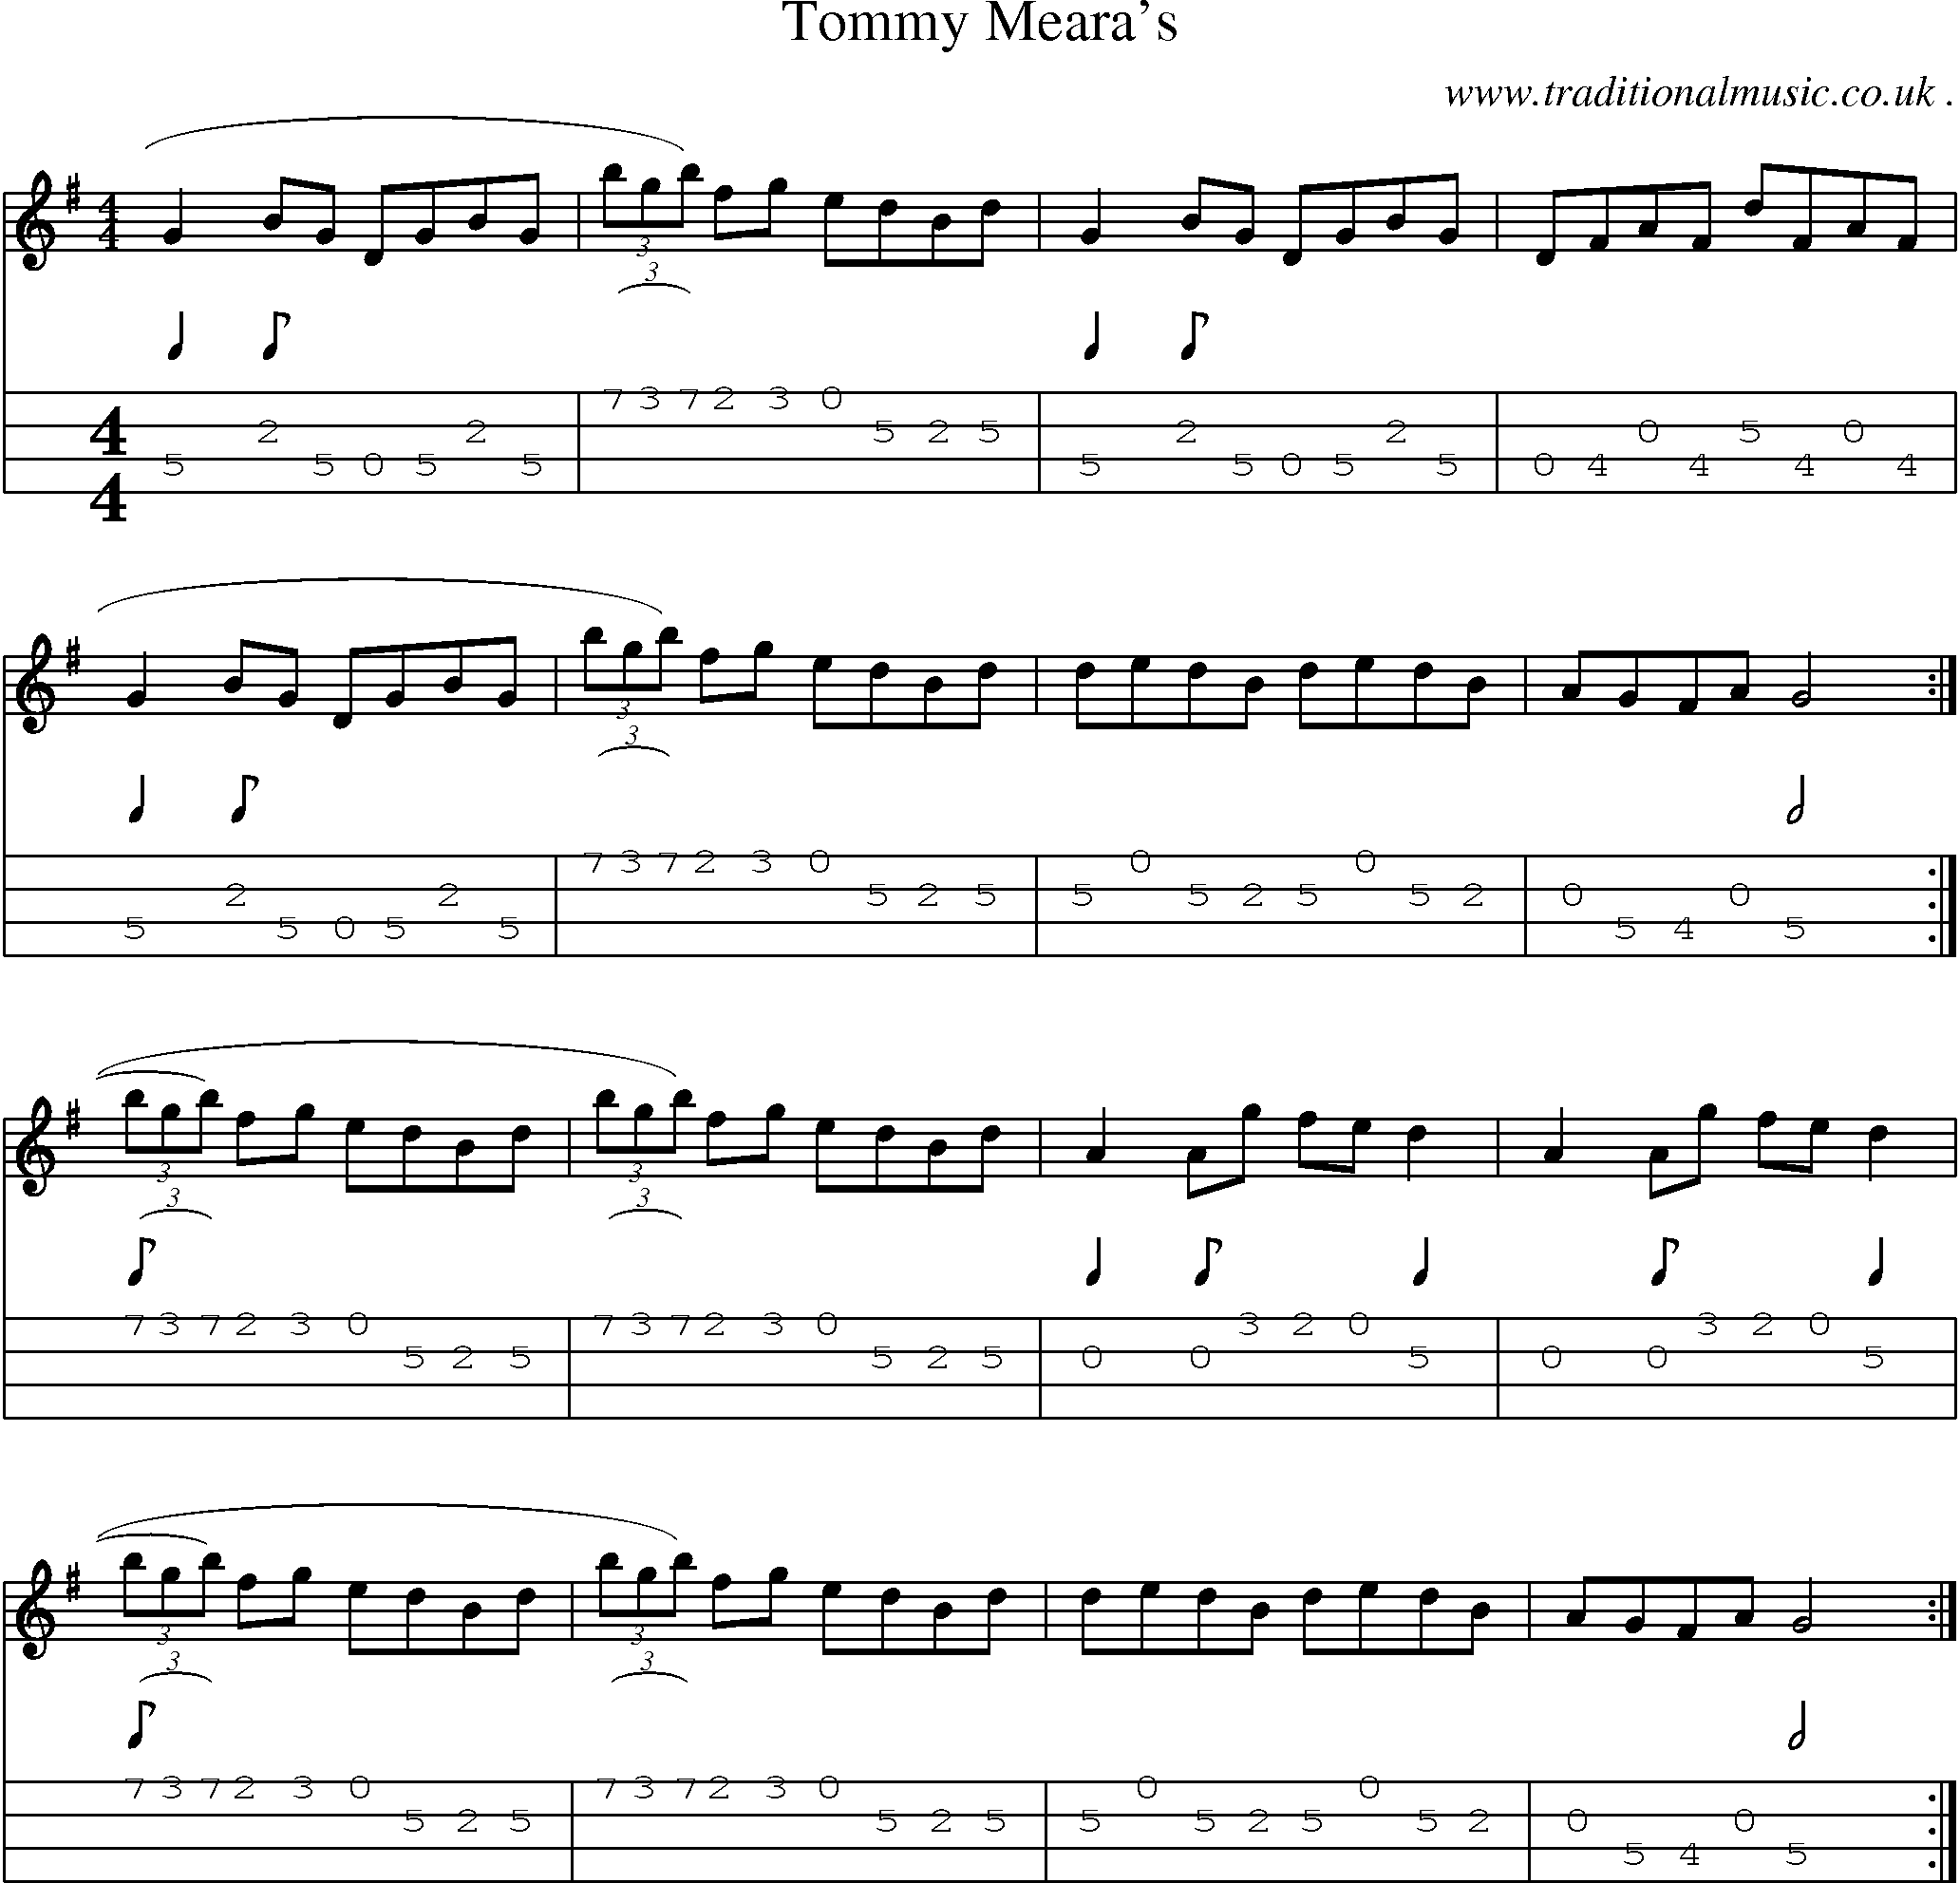 Sheet-Music and Mandolin Tabs for Tommy Mearas